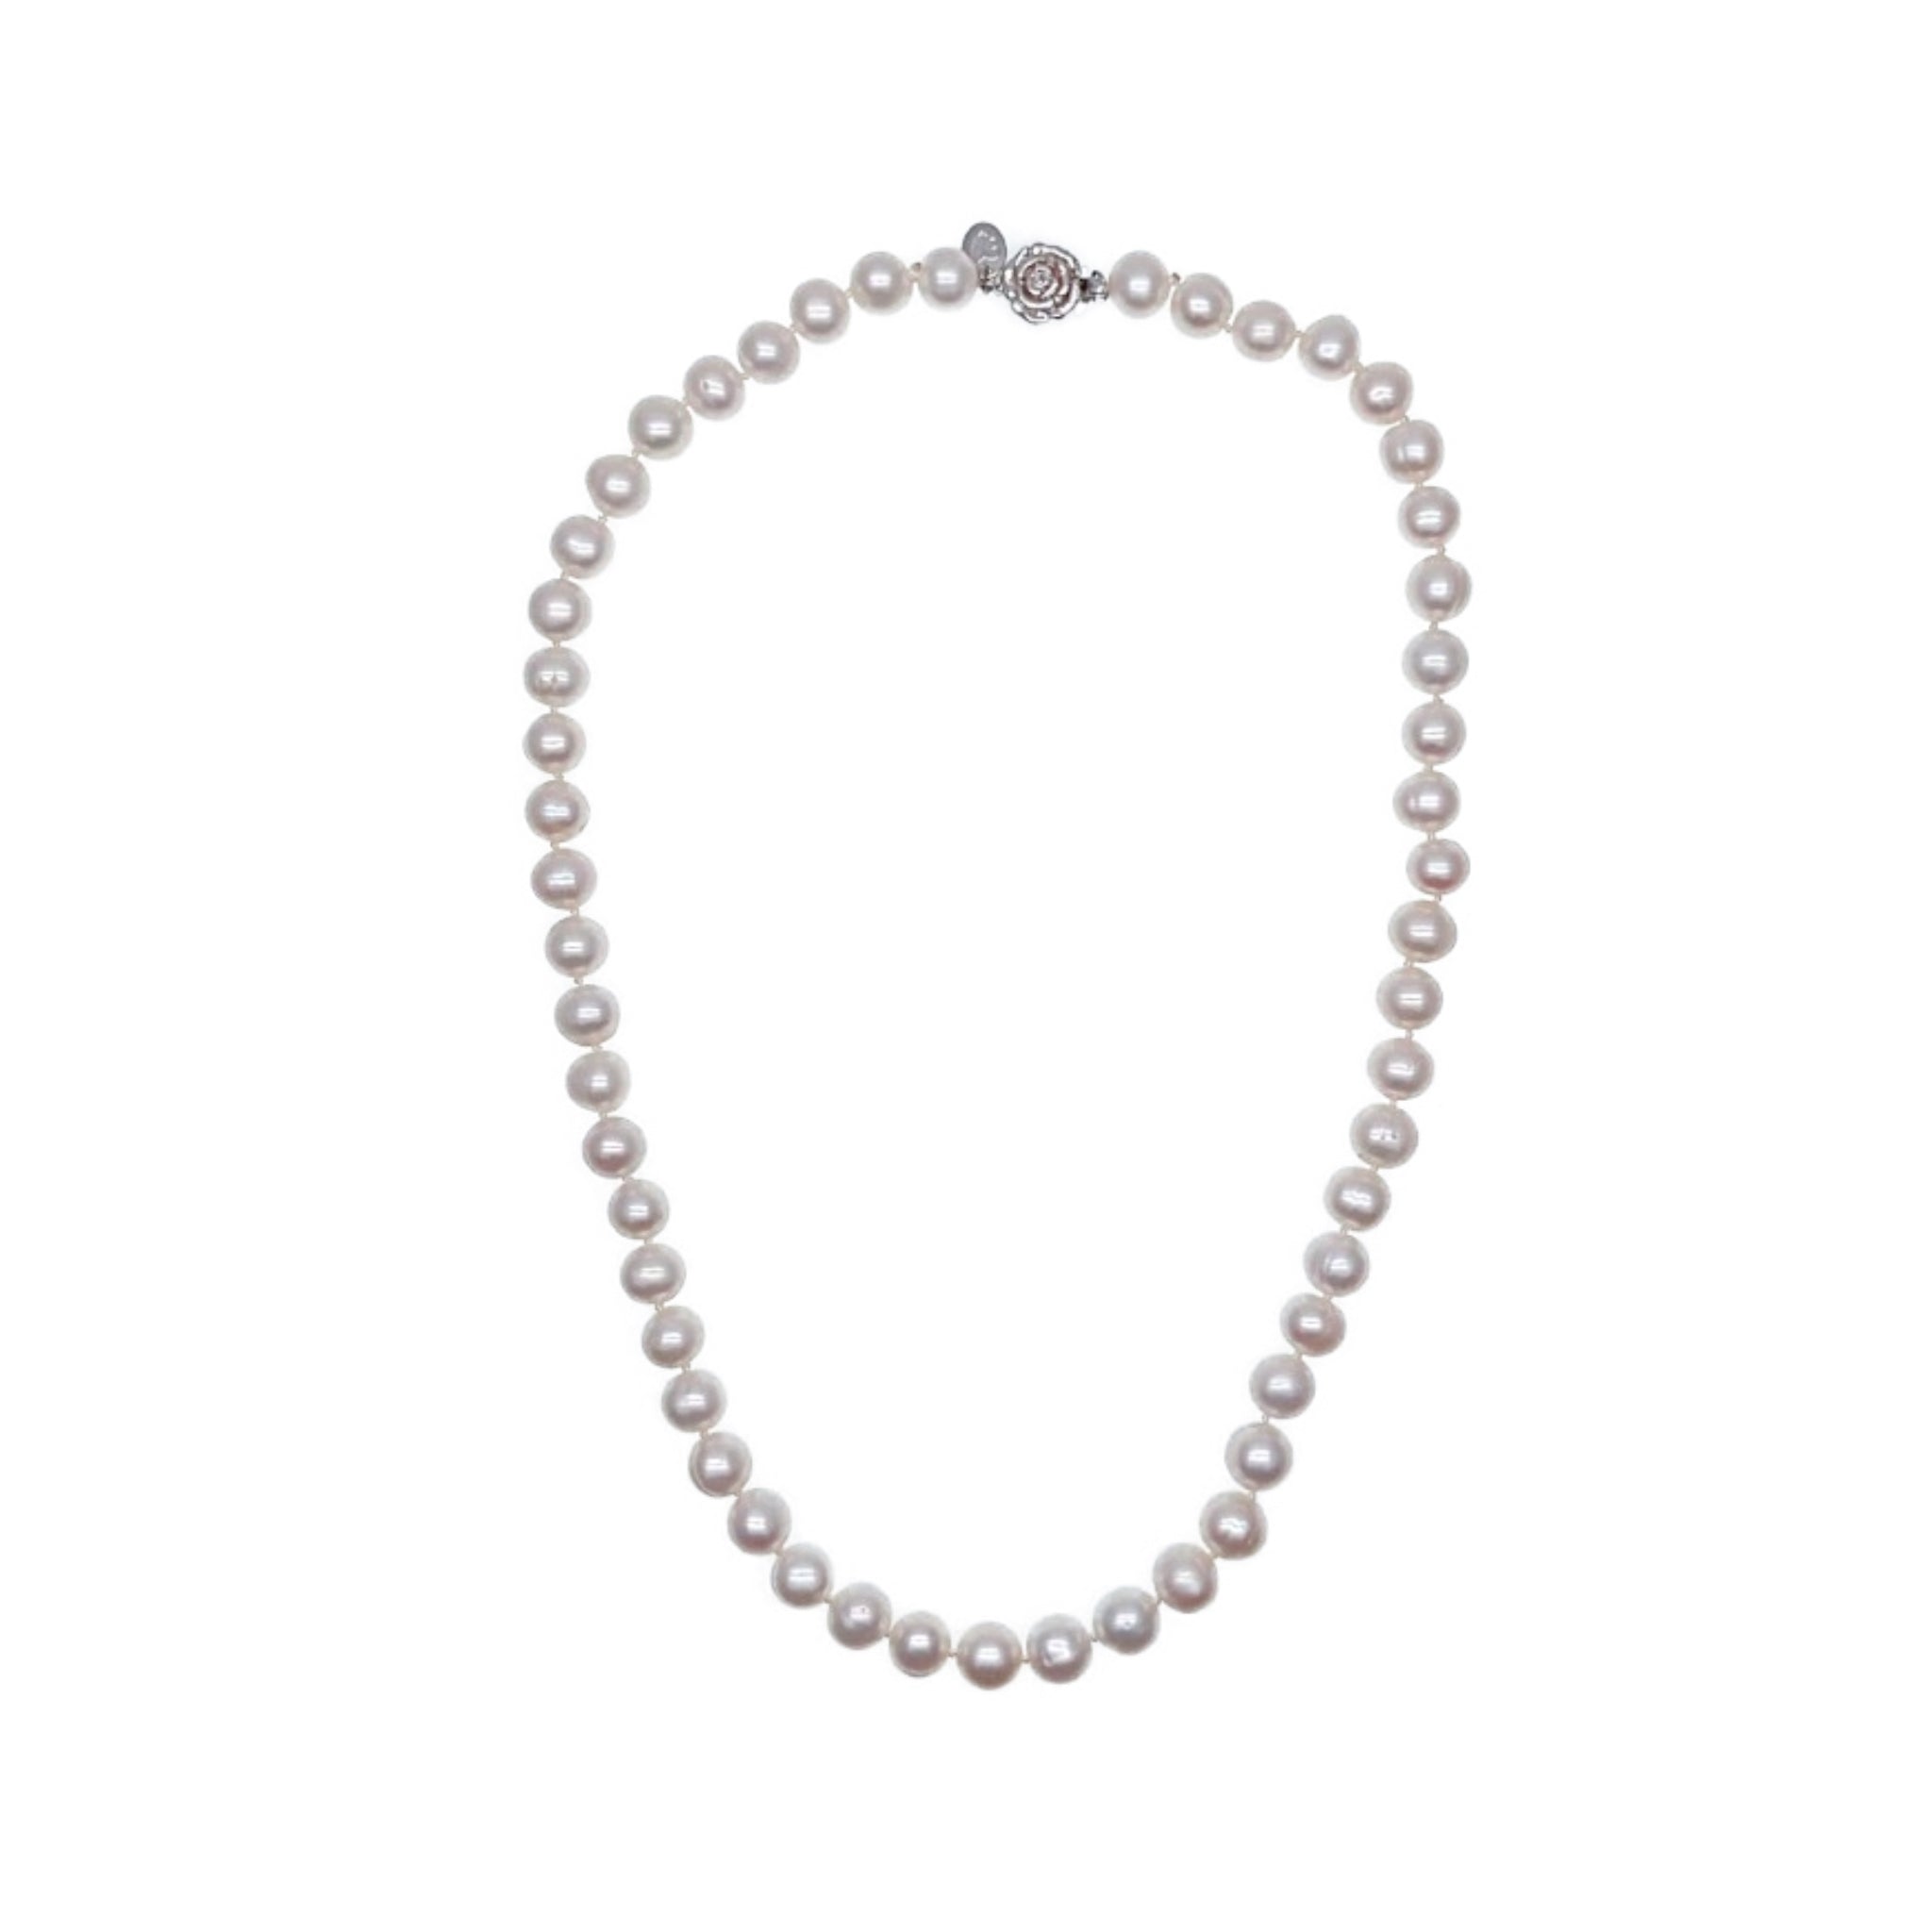 CHOMEL Freshwater Pearl Necklace 20"